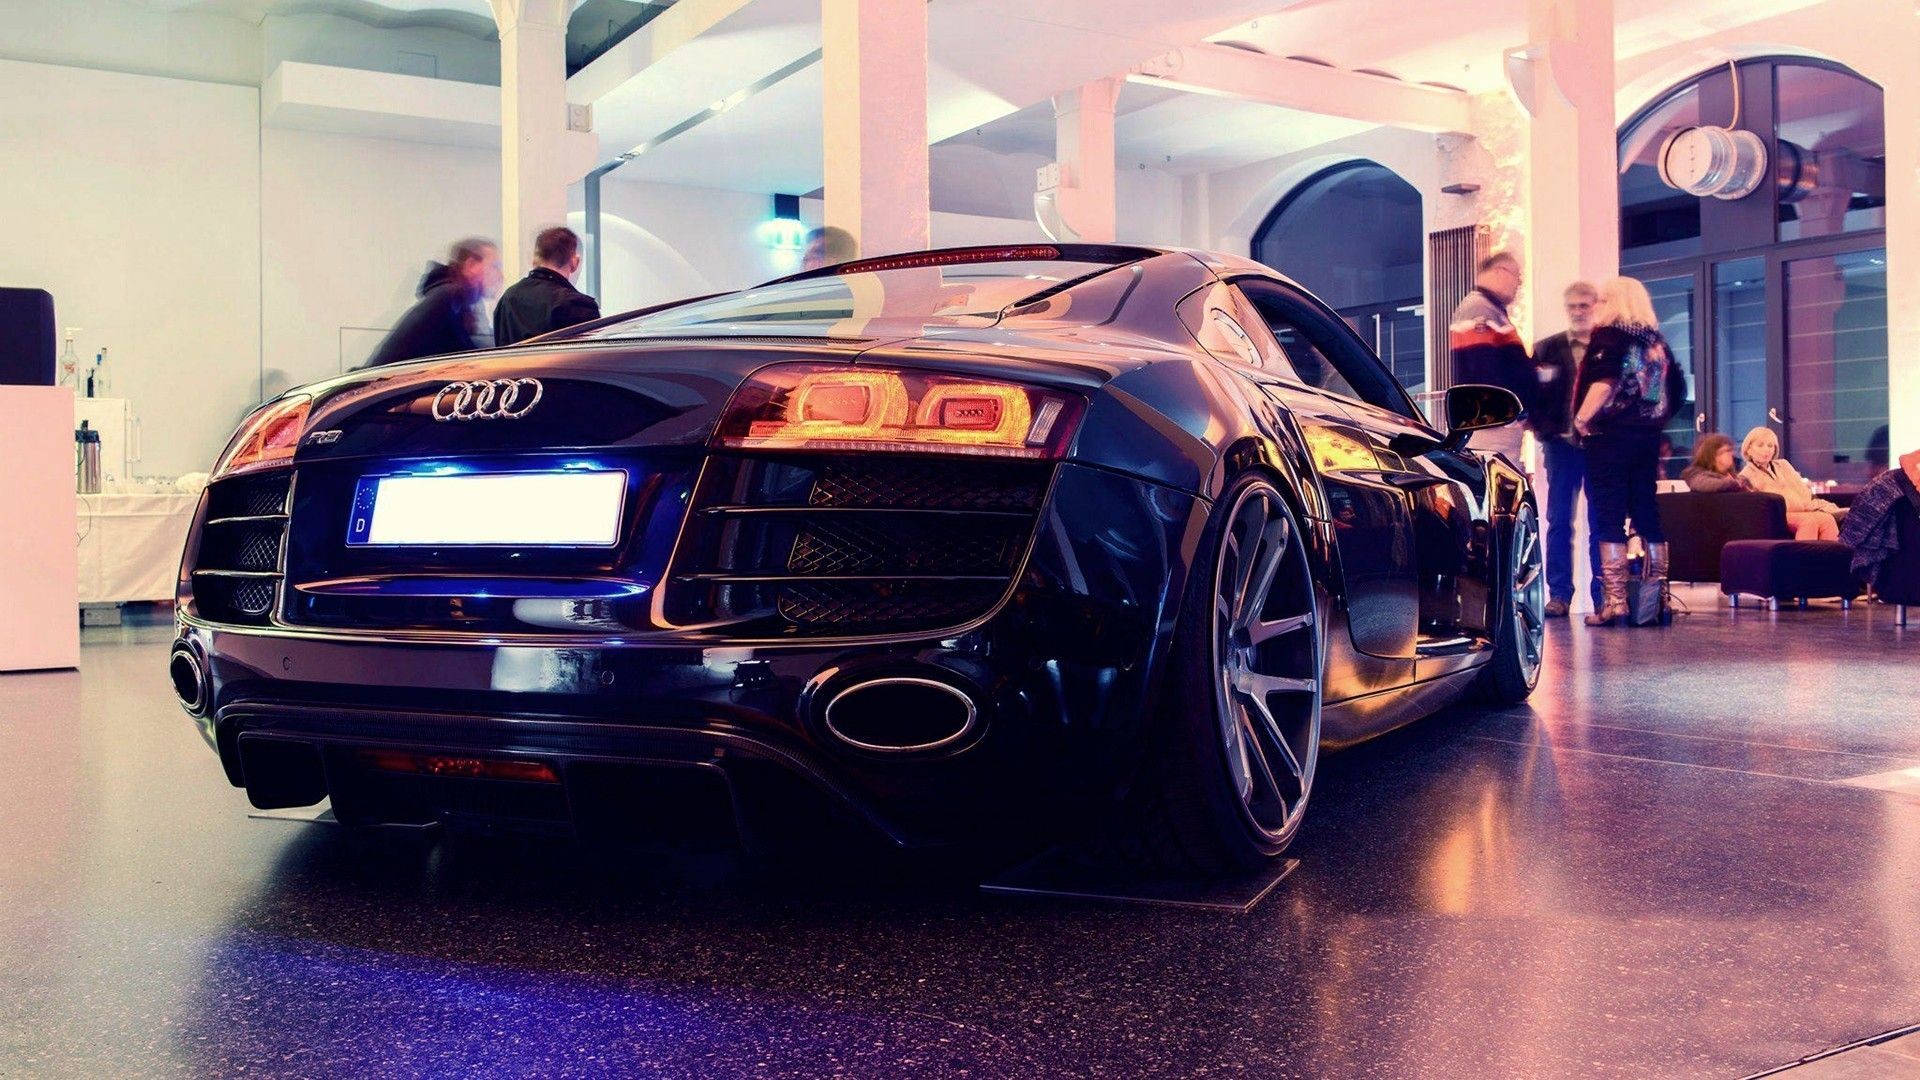 Free photo The Audi R8 is standing in a car dealership